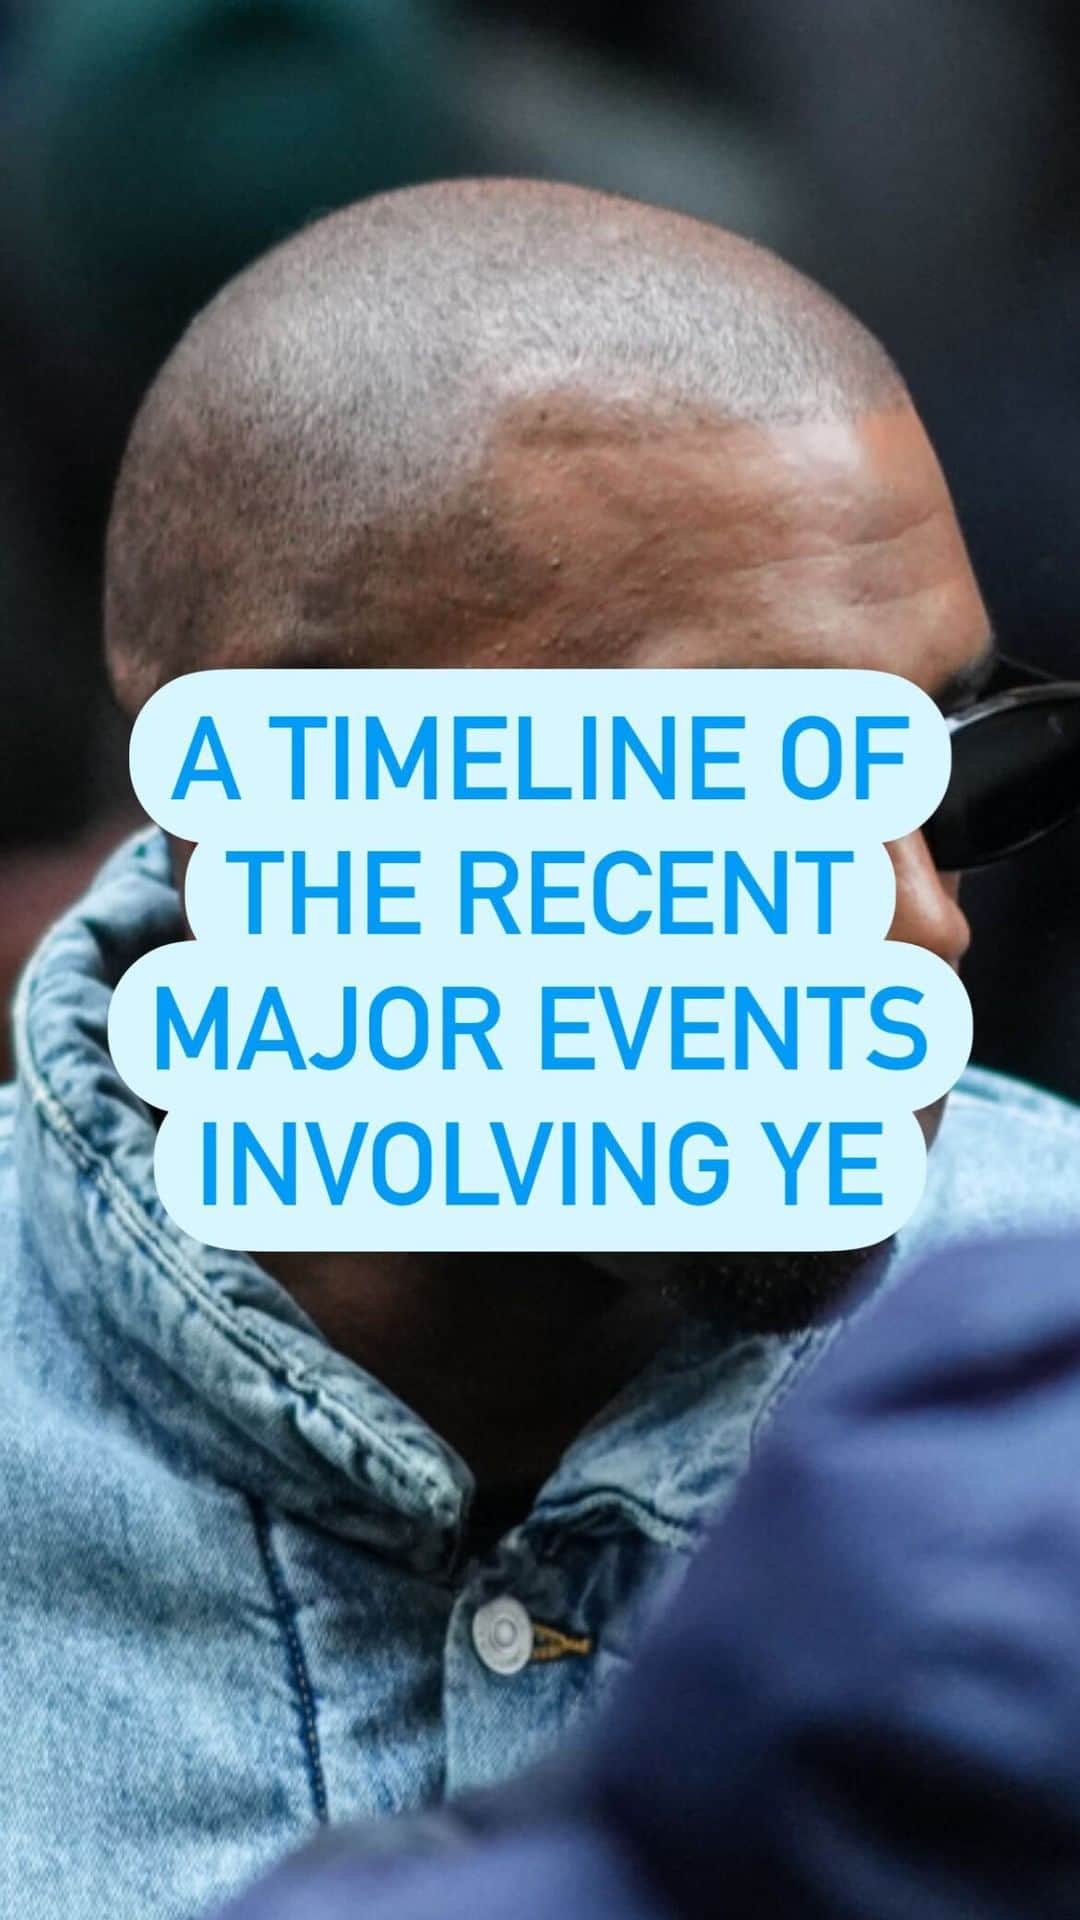 CNBCのインスタグラム：「The last few weeks for Ye, formerly known as Kanye West, have been filled with controversy.   Here's a timeline of the recent major events that have involved him.」